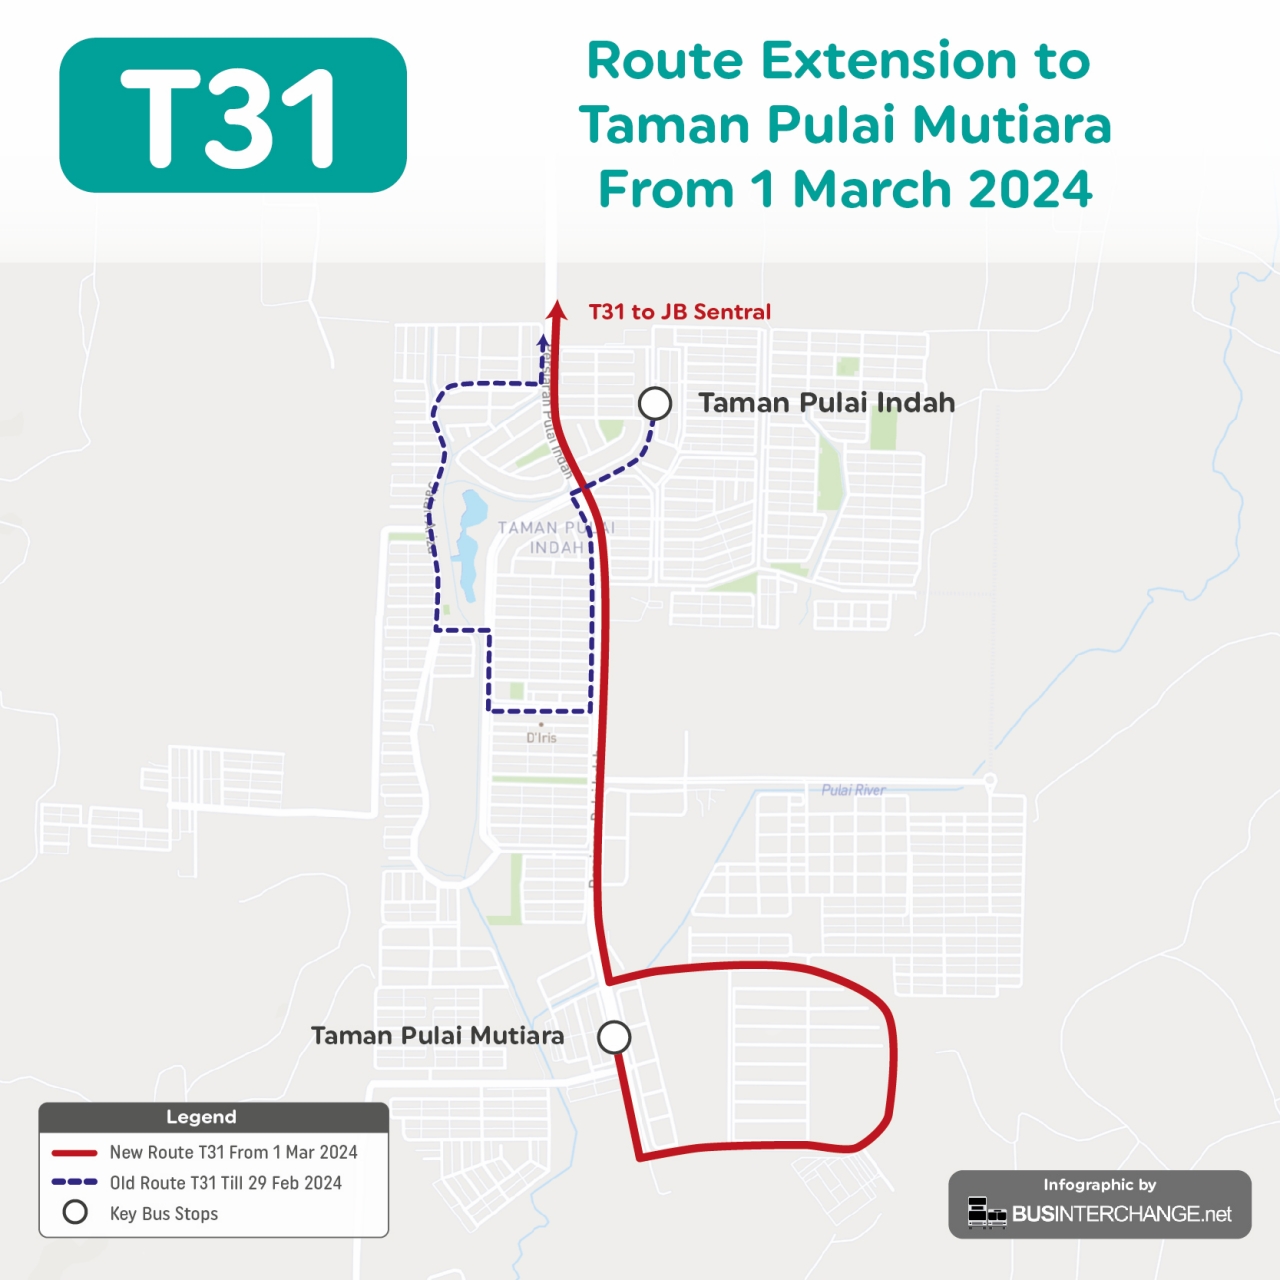 myBas Johor Bahru Route T31 amendment at Pulai Indah area from 1 March 2024